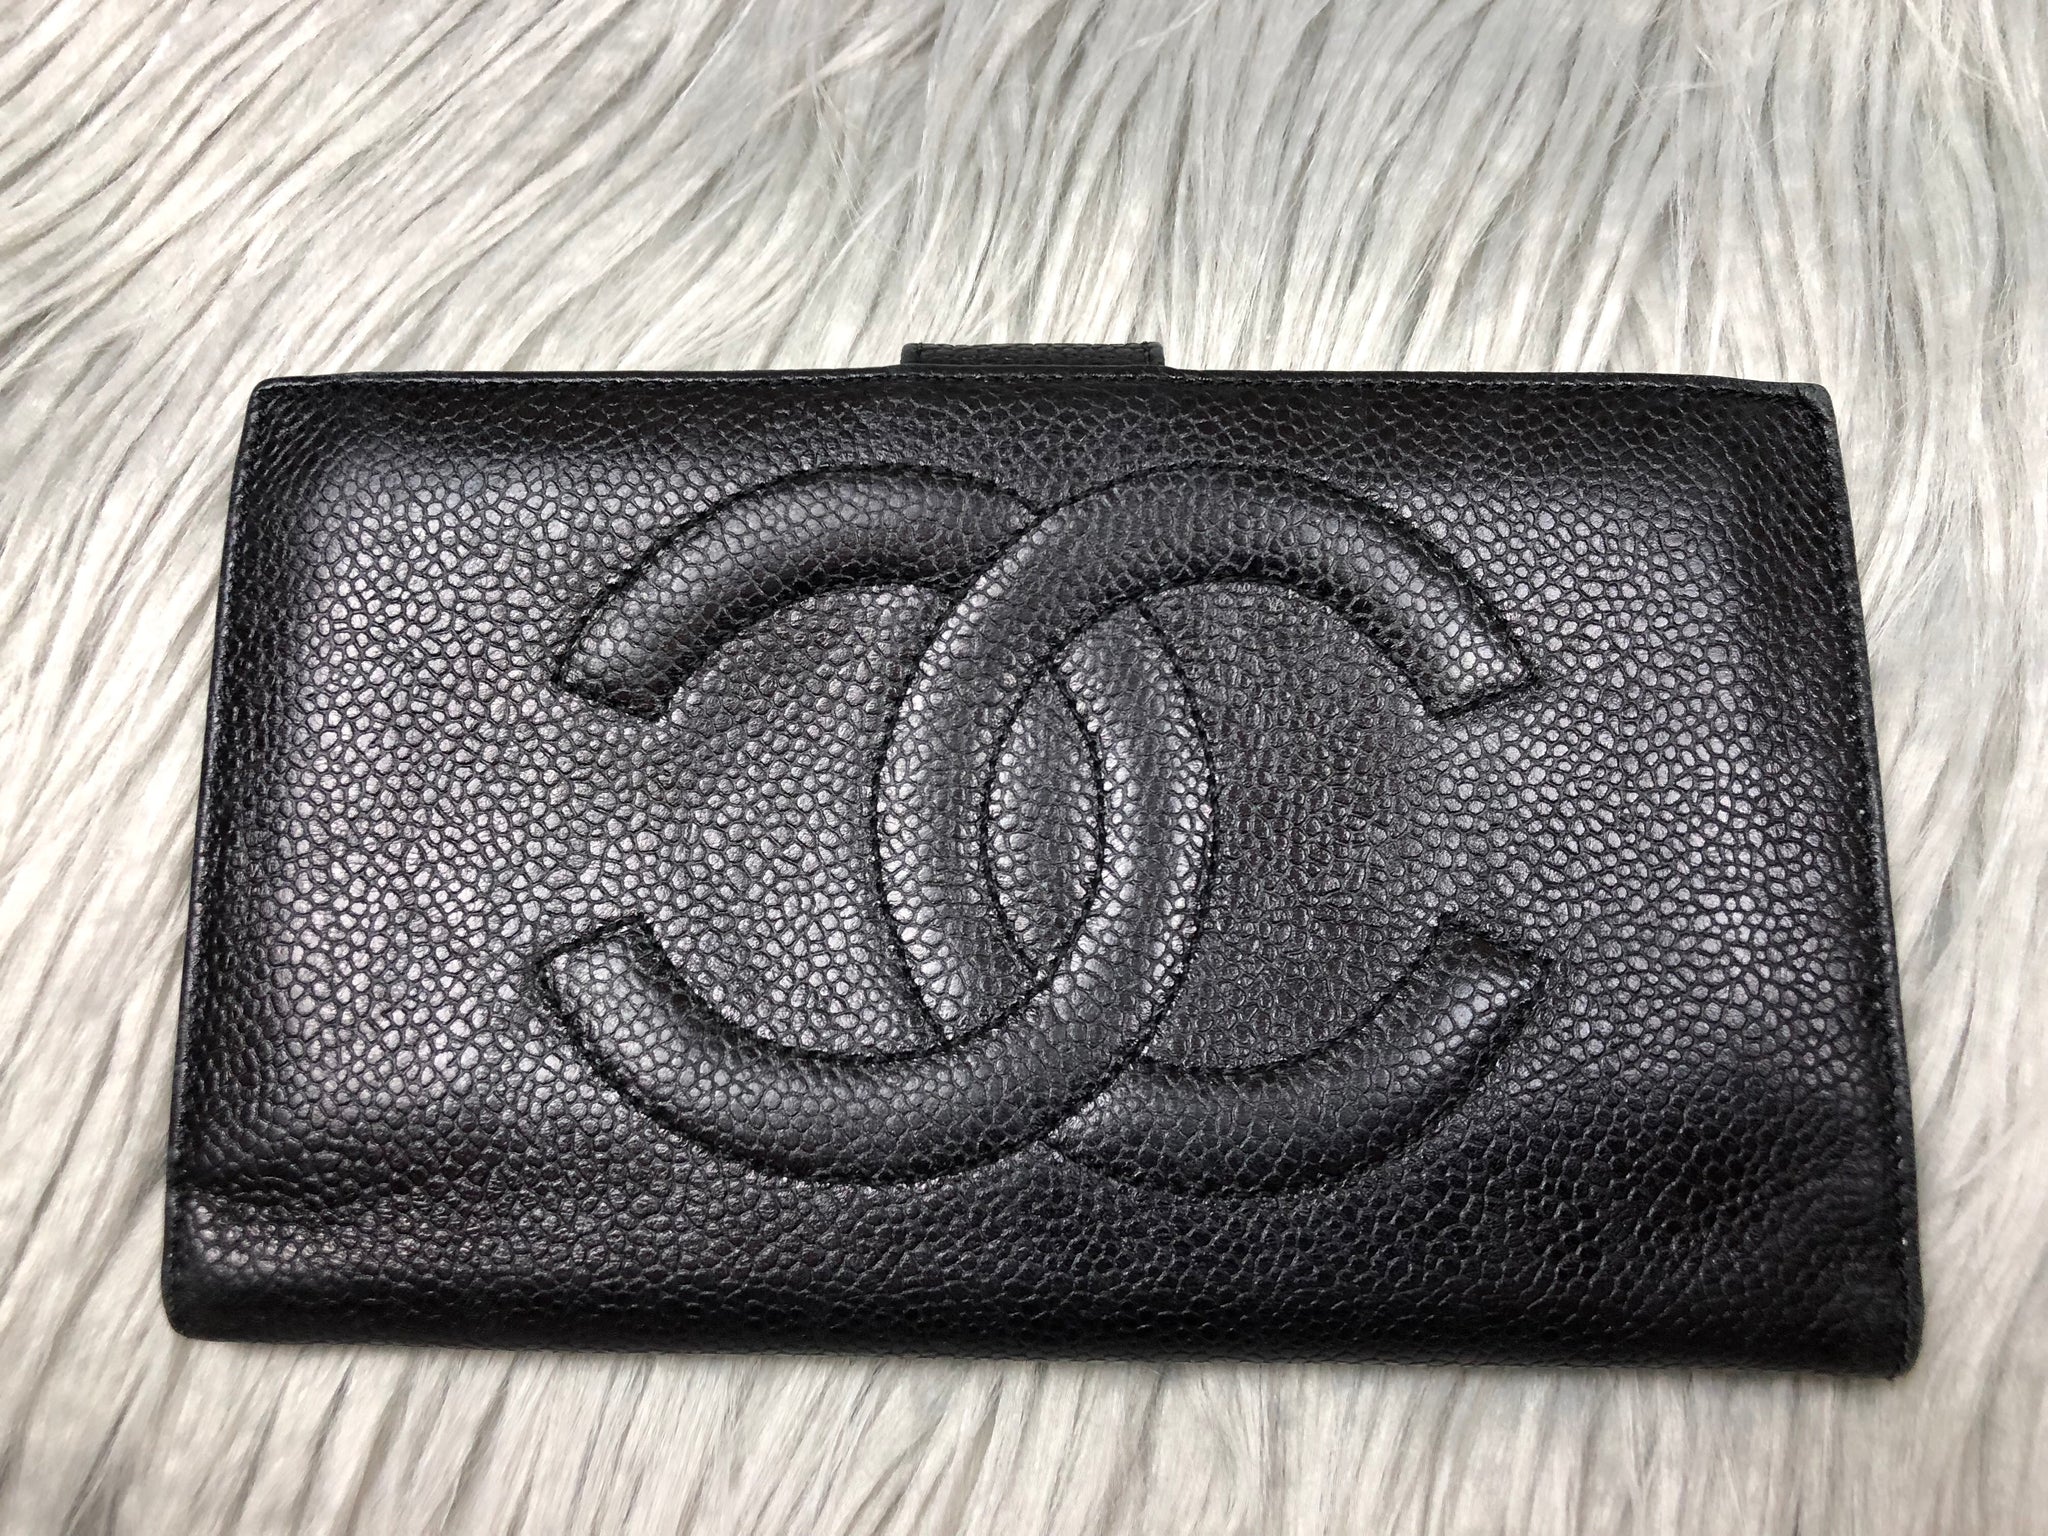 Chanel Pre Owned Boy Black Caviar Quilted Leather Zip Around